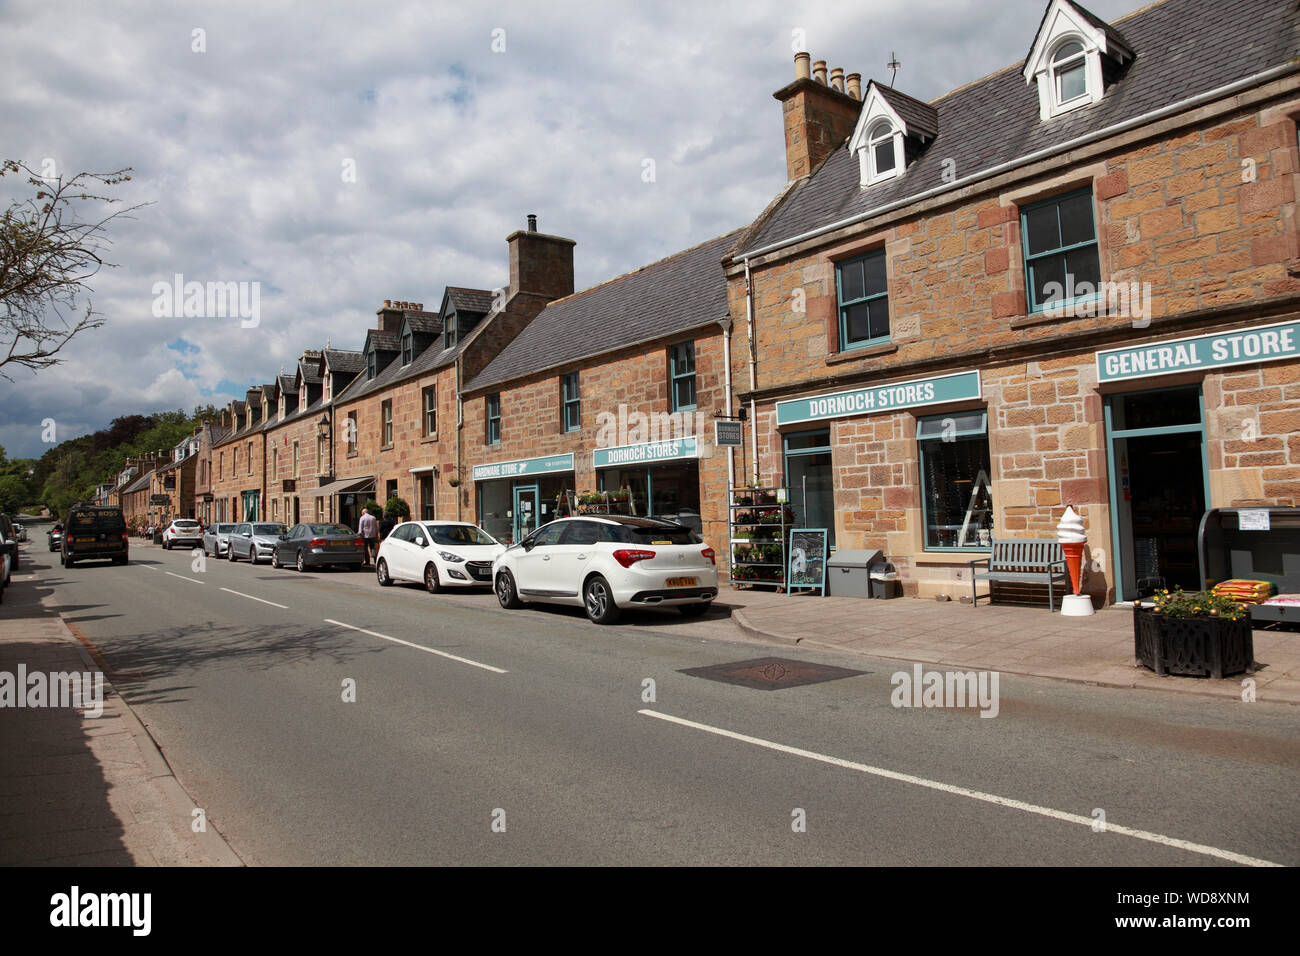 Castle Street and the General Store at Dornoch, a town in Sutherland, Highland, on the north east coast of Scotland Stock Photo